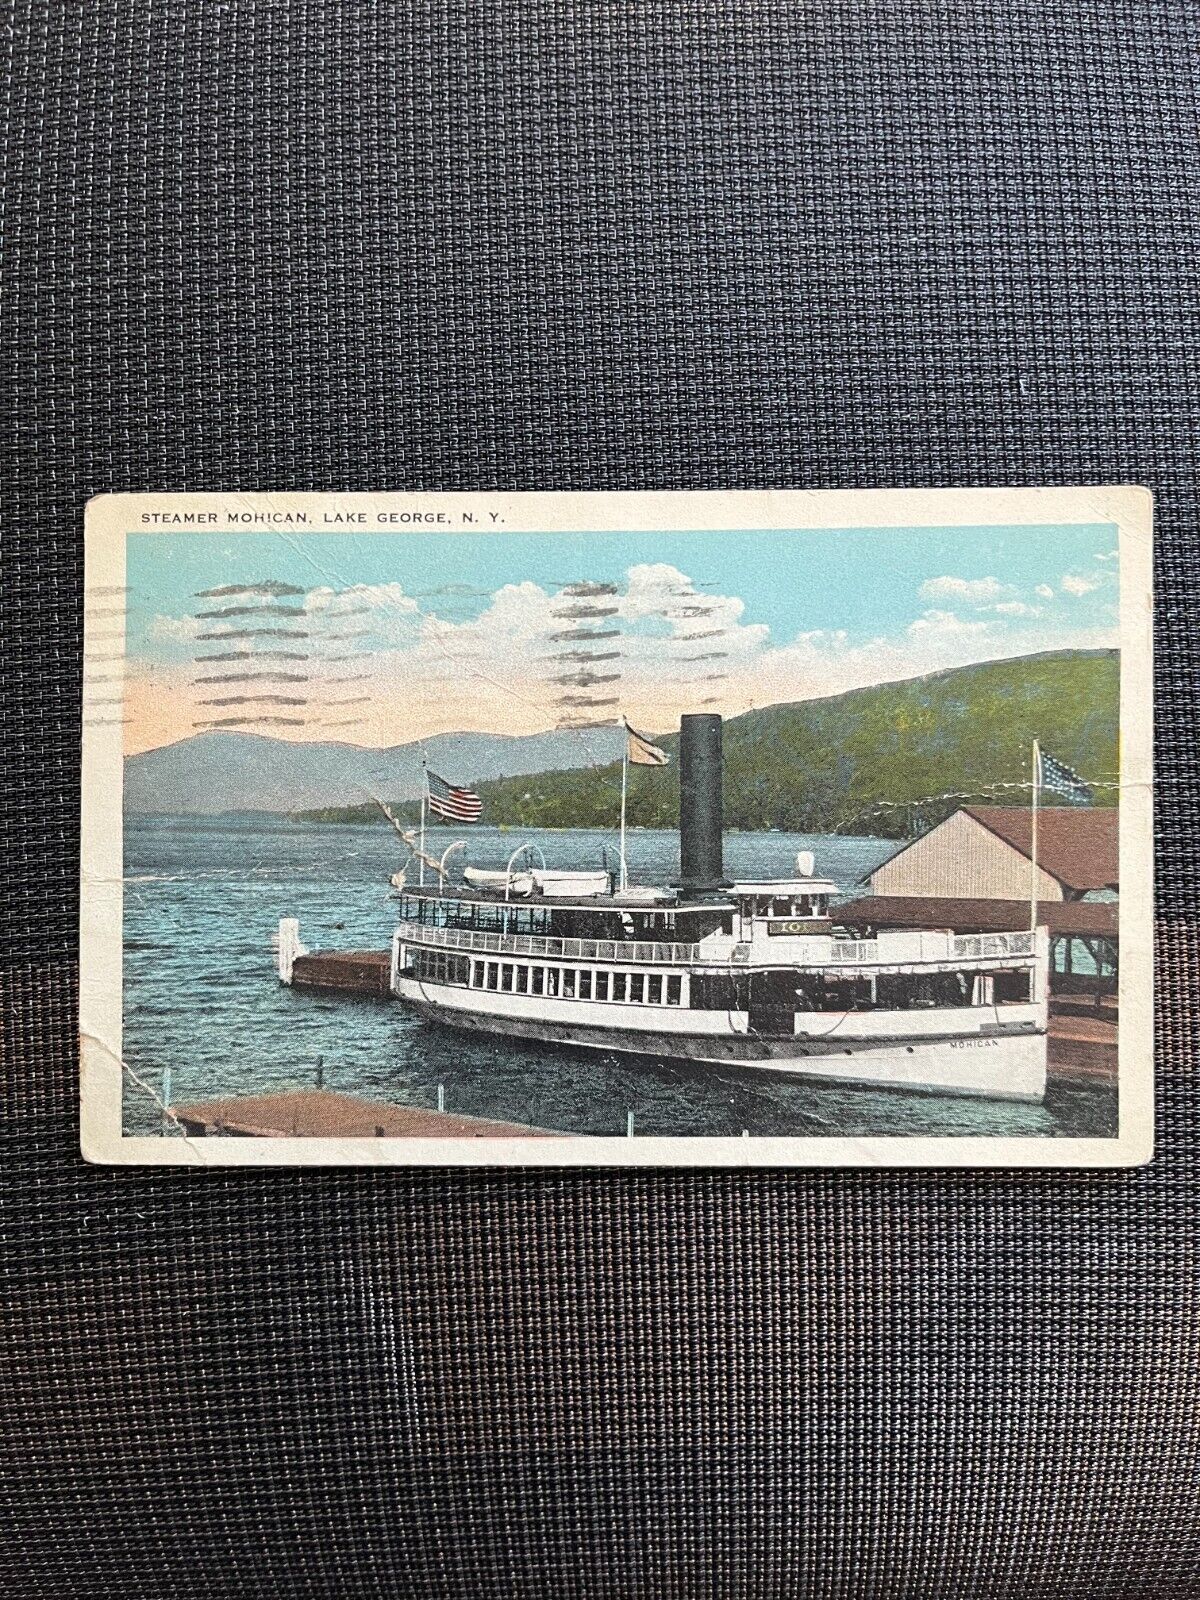 Vintage Color Postcard of the Steamer Mohican, Lake George, NY